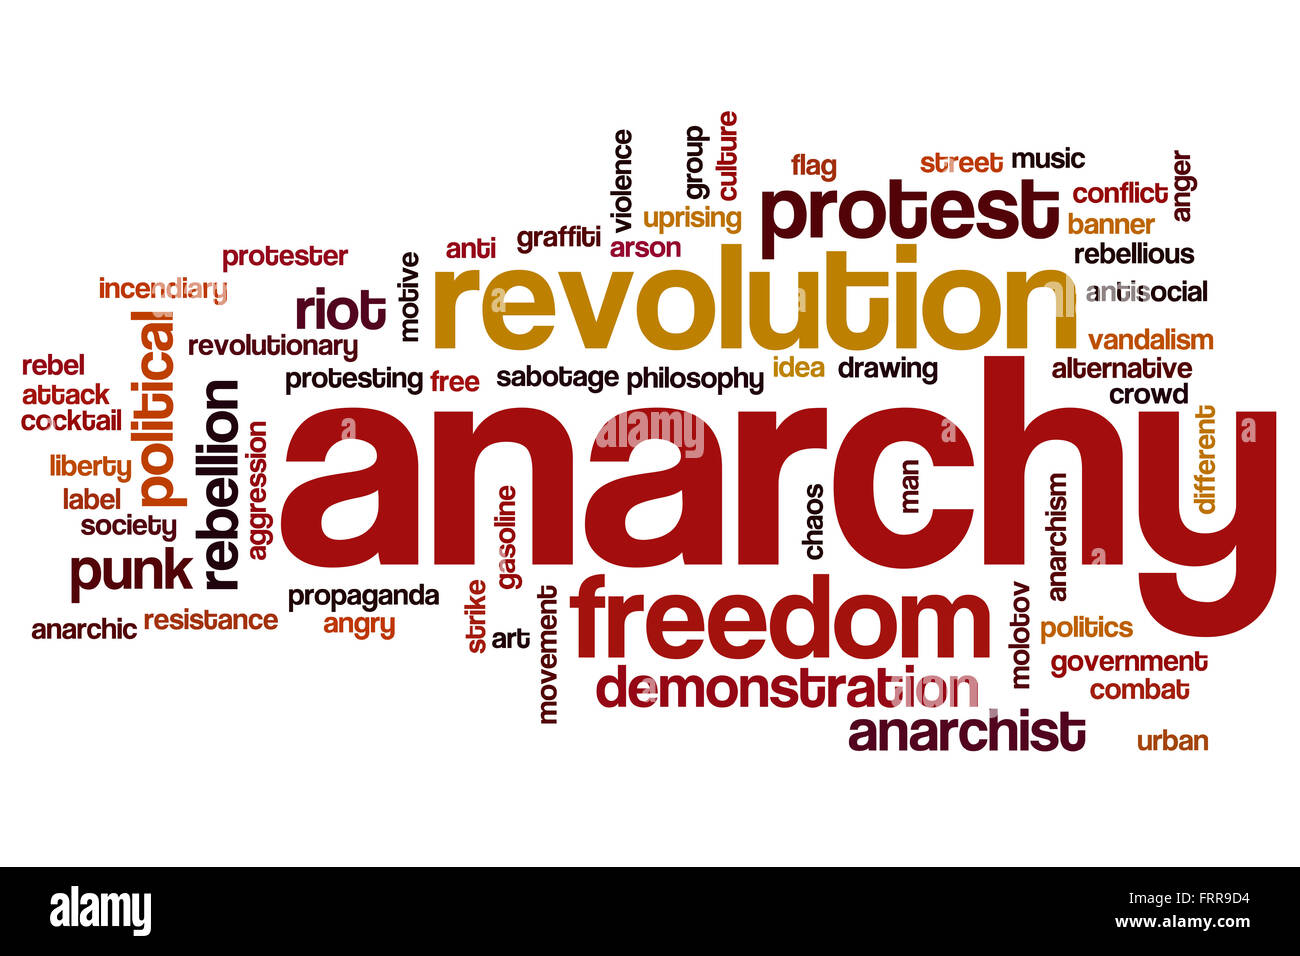 Anarchy word cloud concept Stock Photo